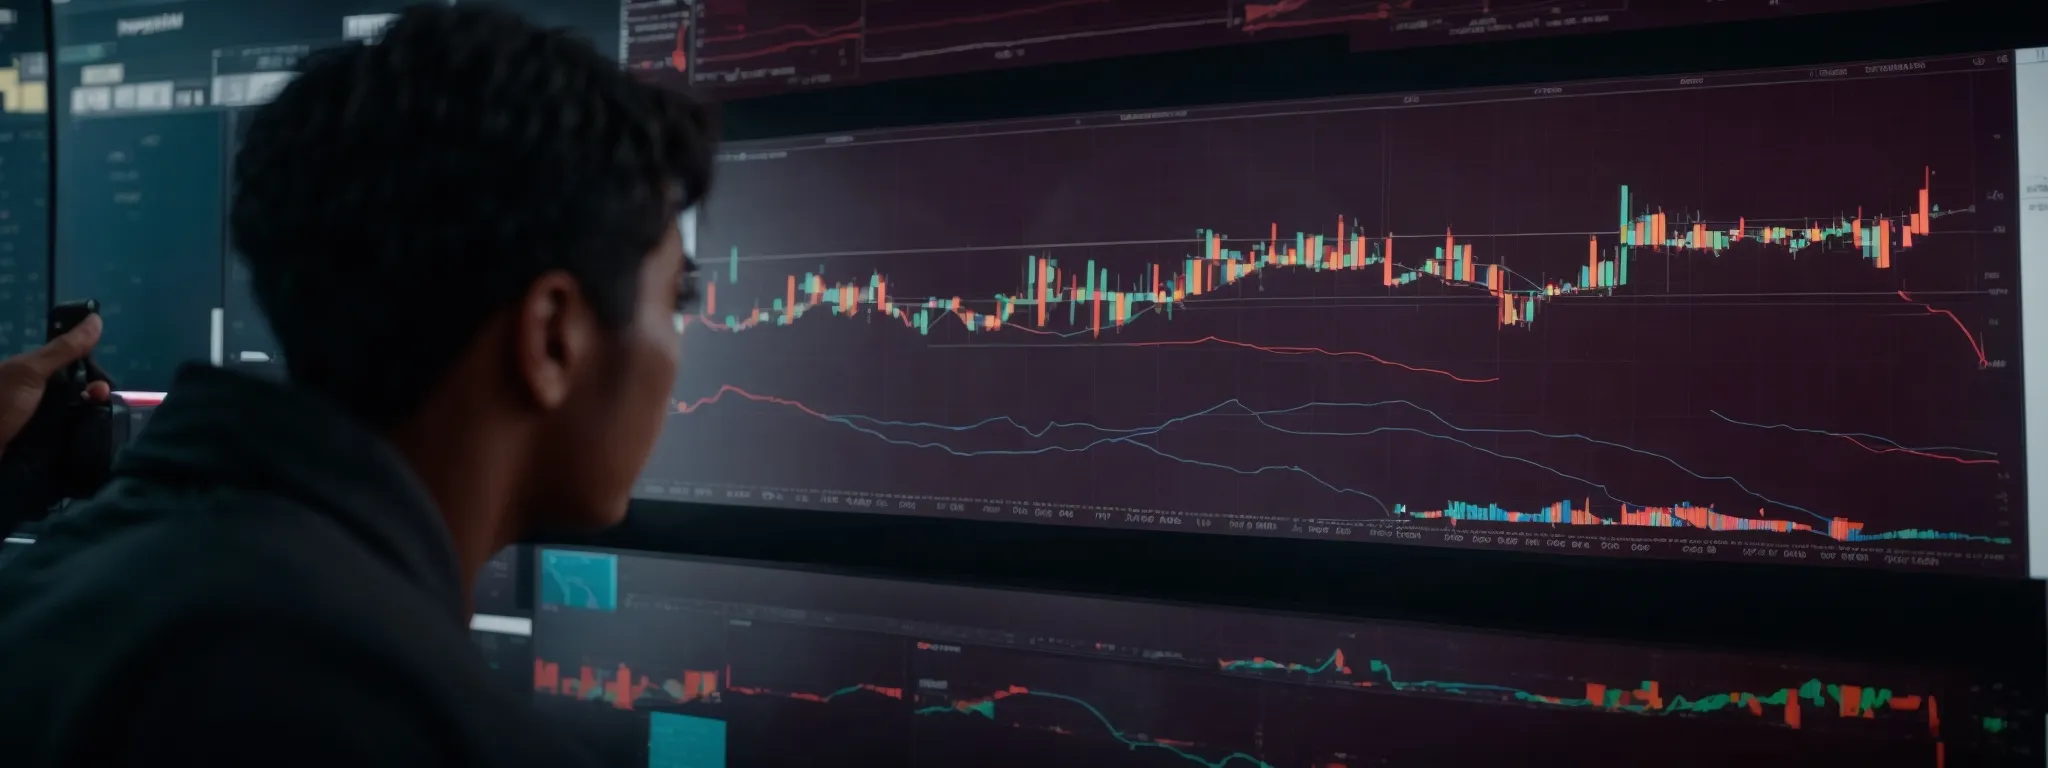 a person expectantly gazes at a large, vibrant display screen showing a fluctuating graph chart indicative of market trends and digital analysis.